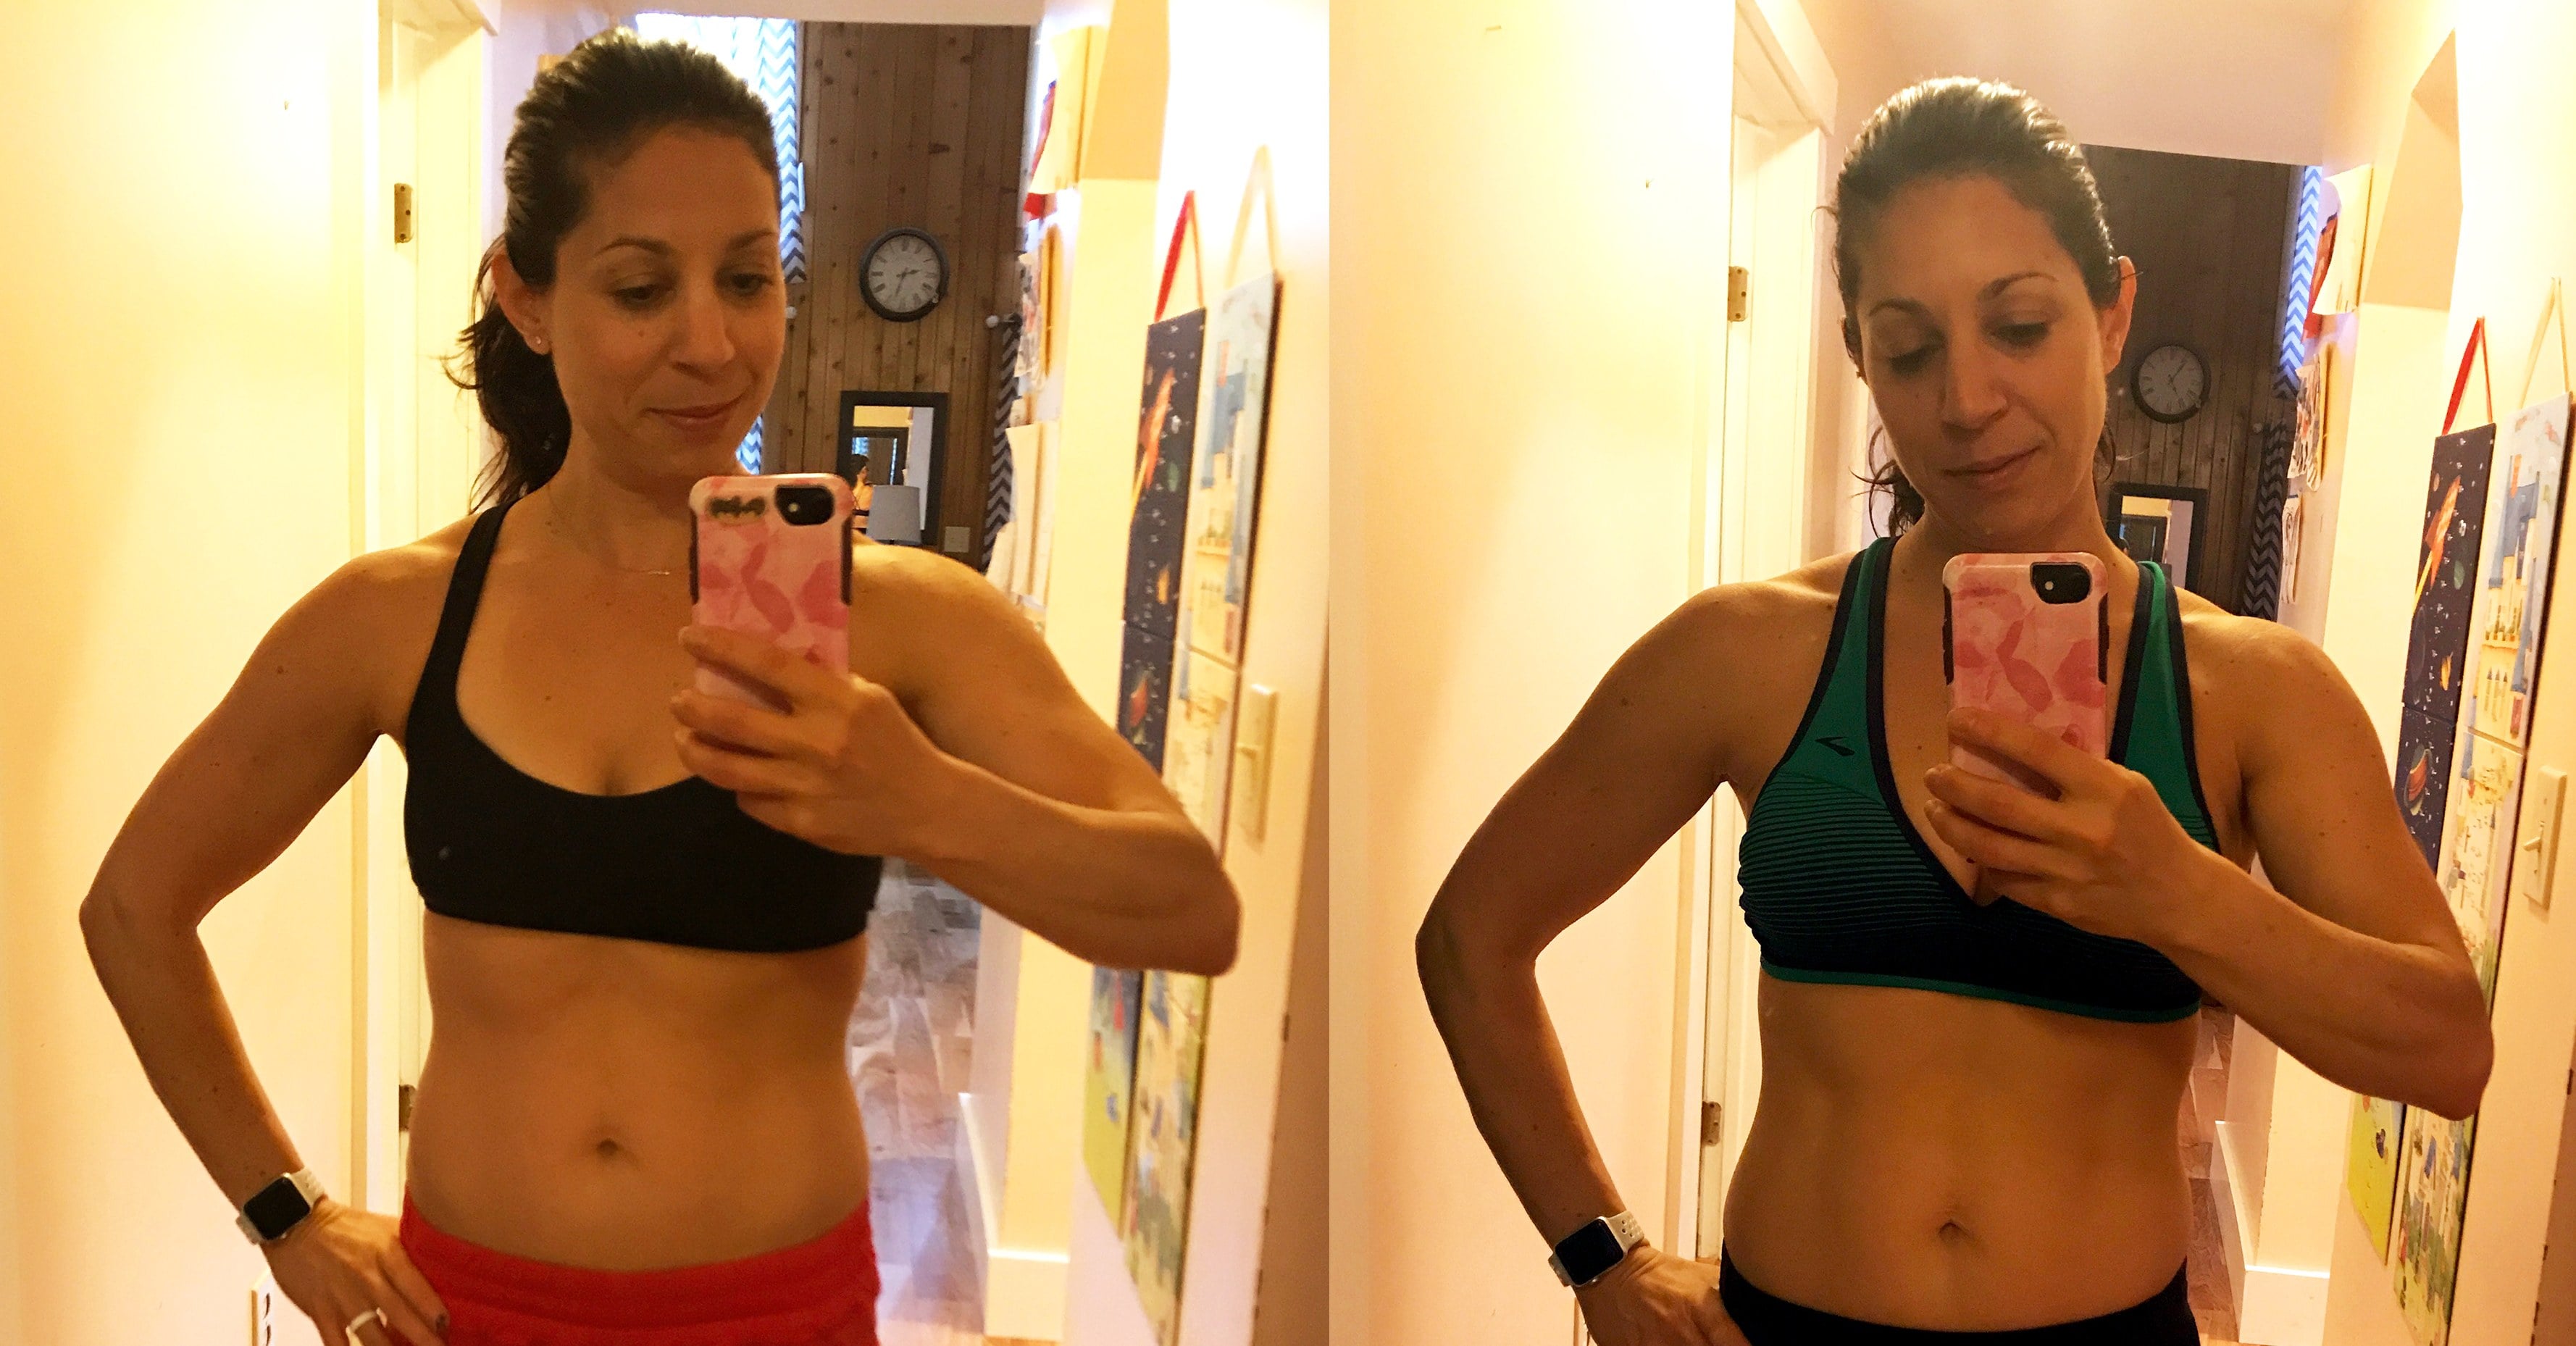 Weight loss transformation diaries week 2: Intermittent fasting is